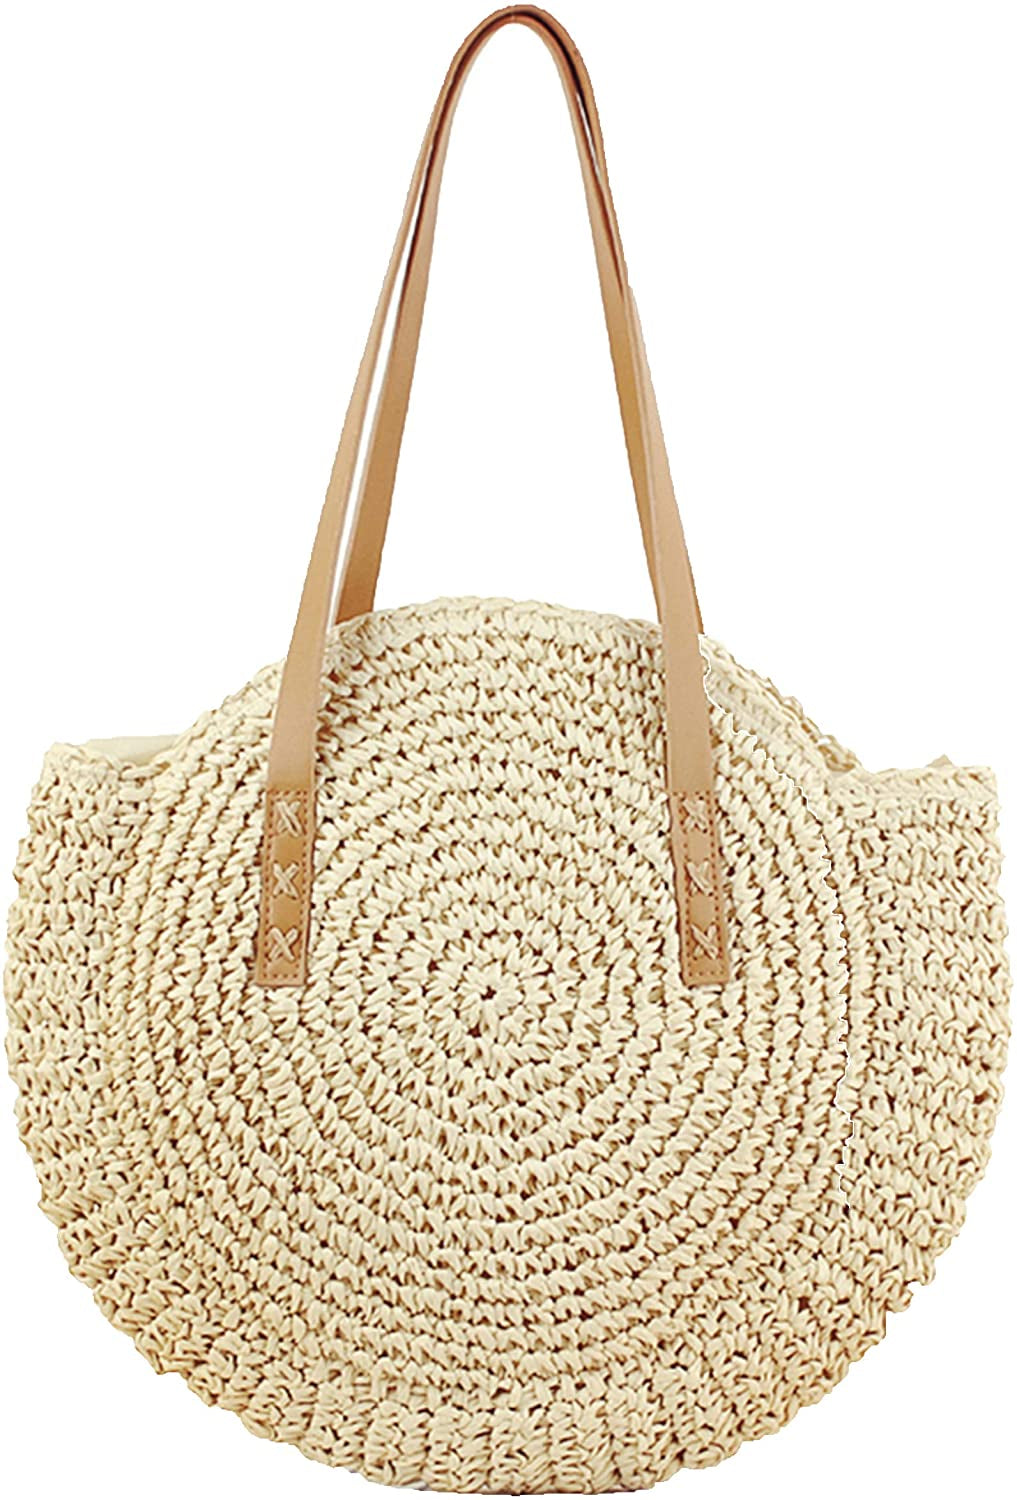 Straw Handbags Women Handwoven round Corn Straw Bags Natural Chic Hand Large Summer Beach Tote Woven Handle Shoulder Bag